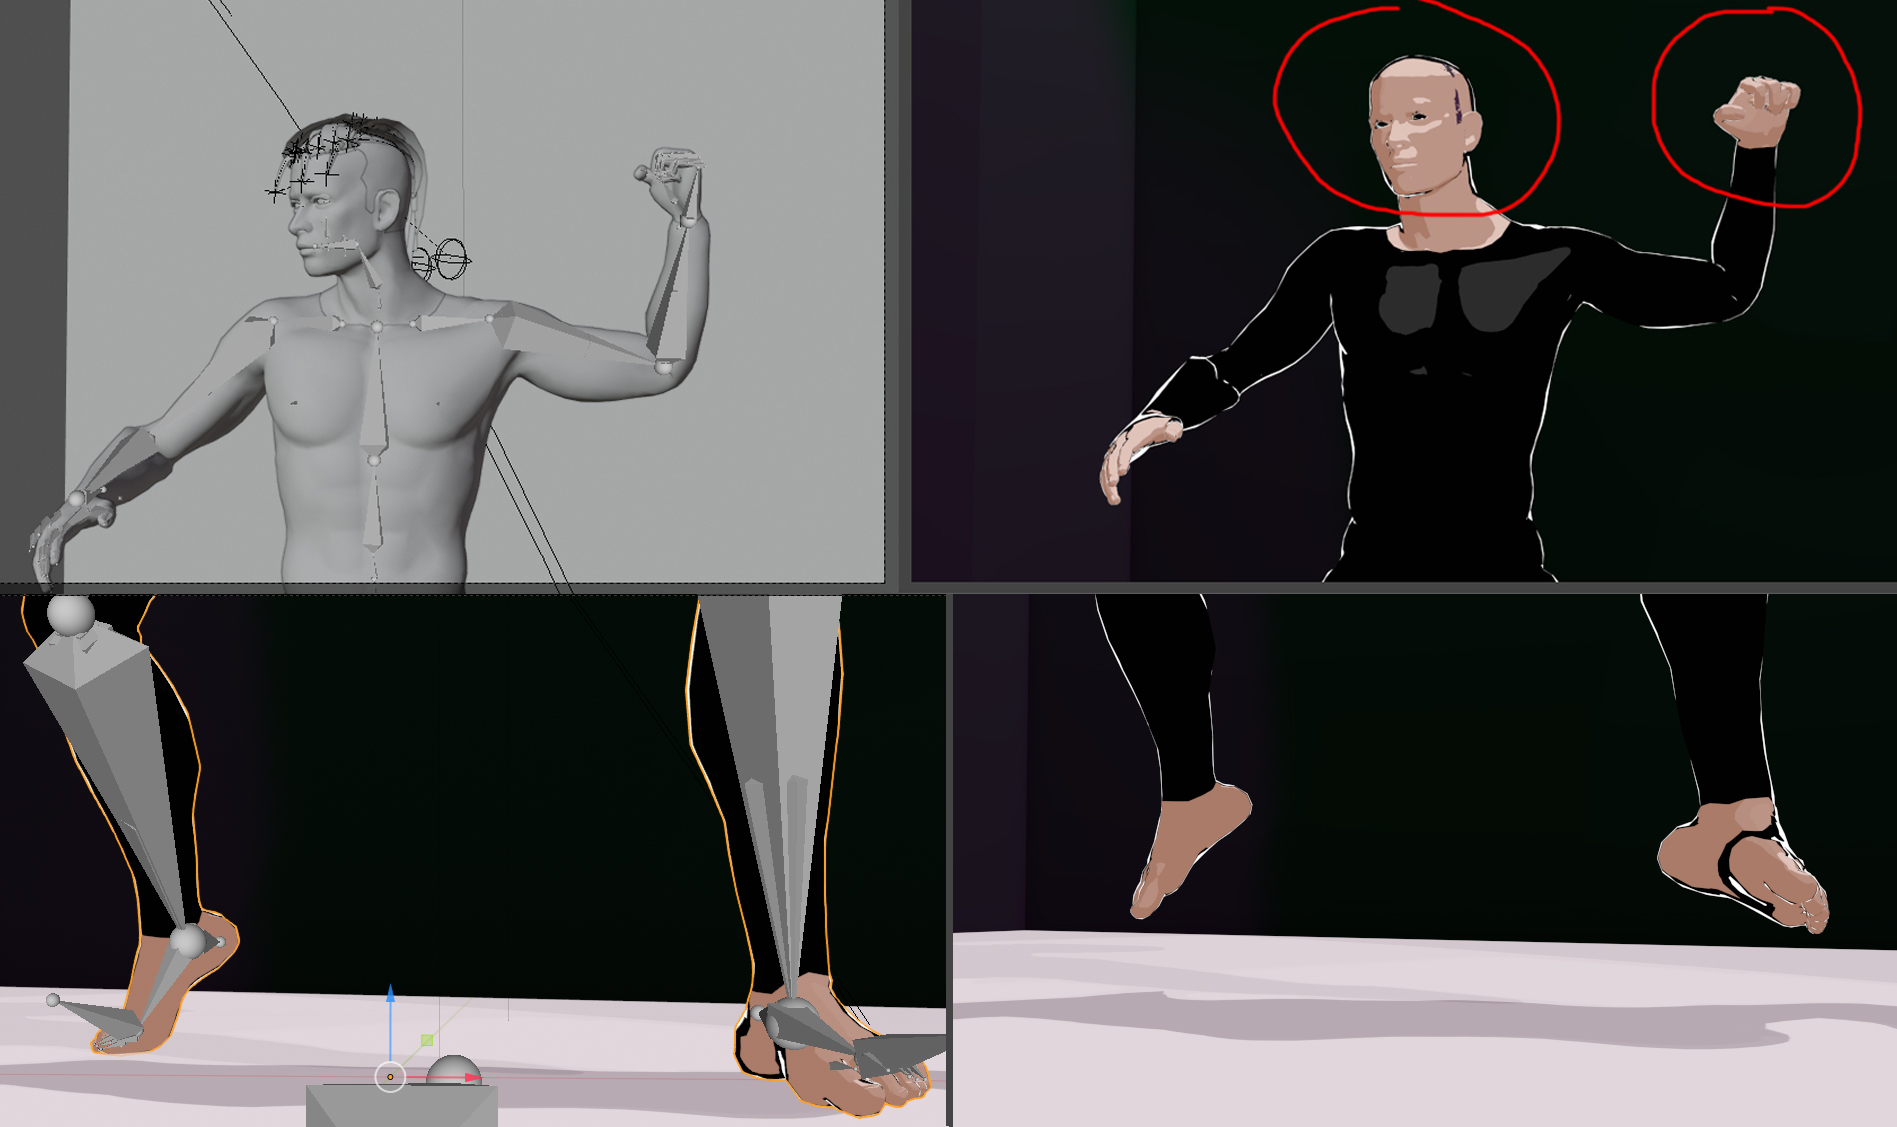 Impossible to pose a 3D model! Help plz - Animation and Rigging